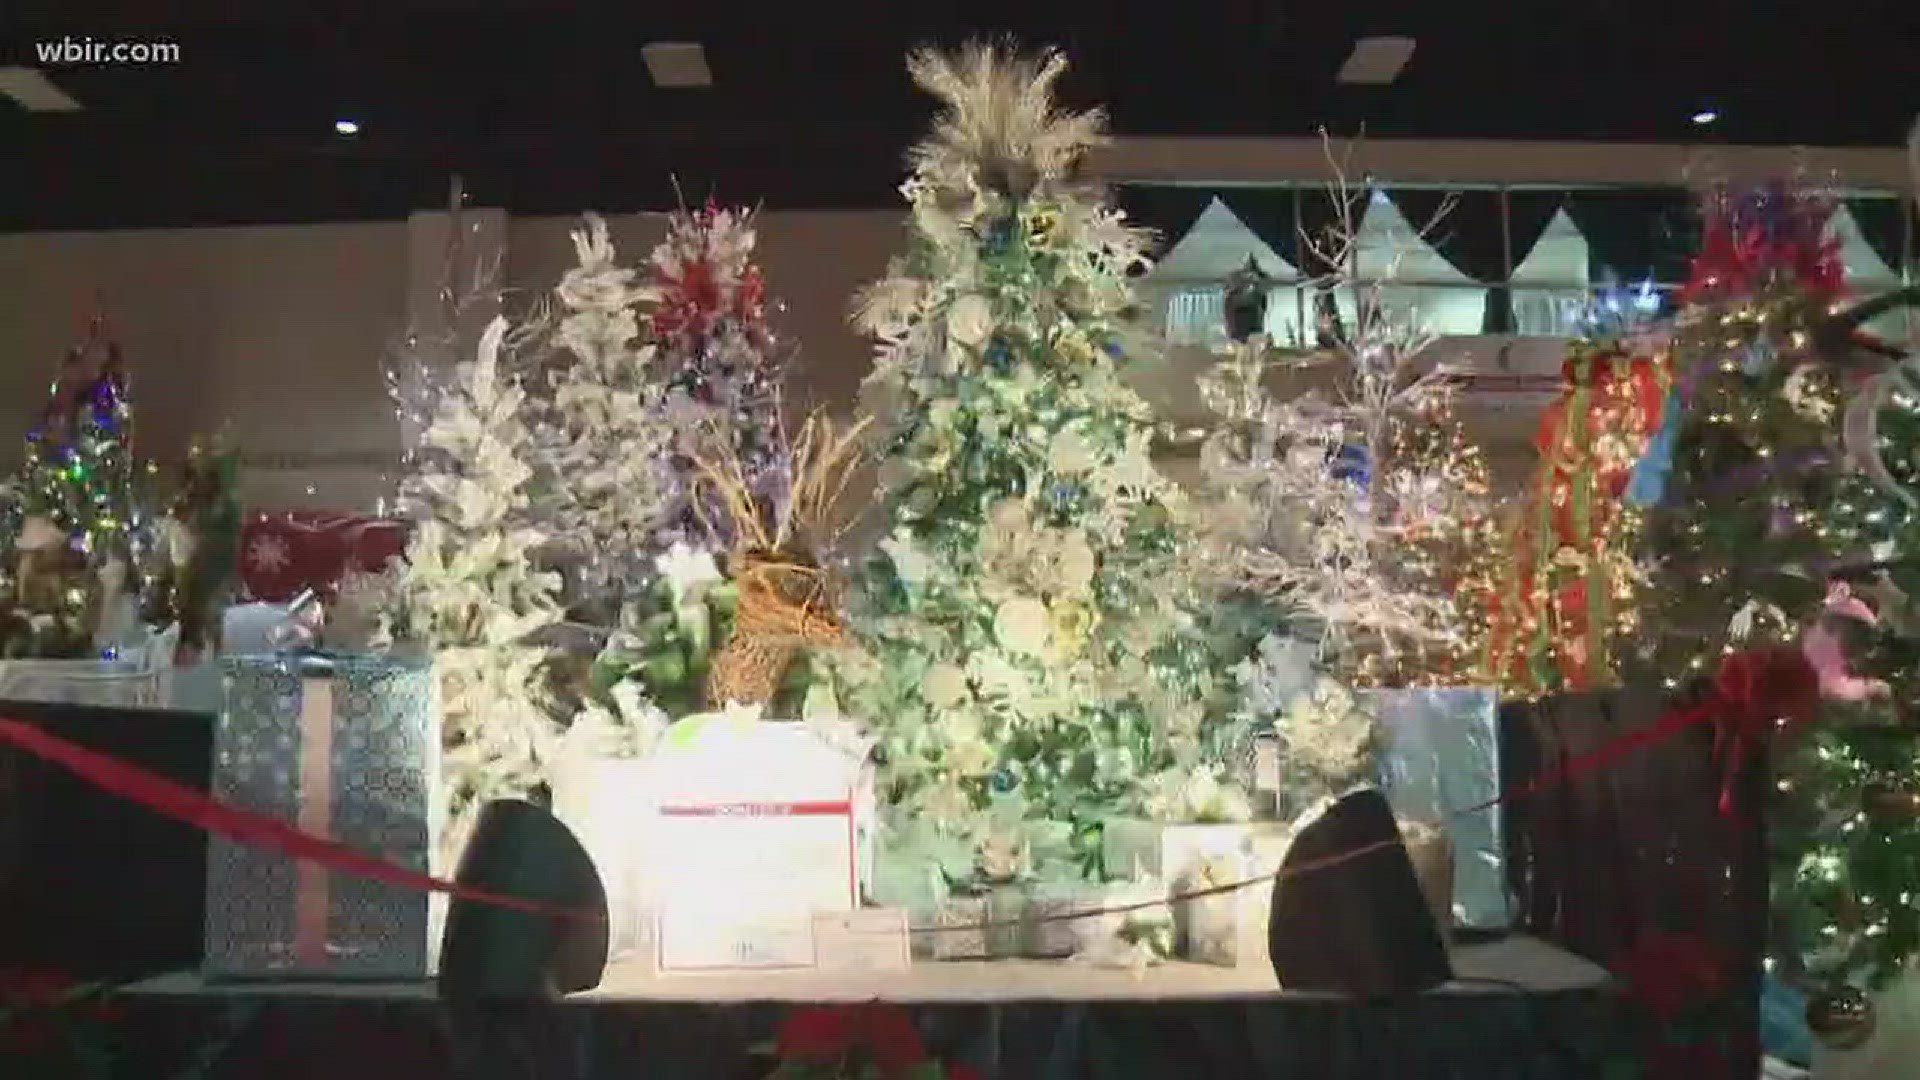 Designer Sam Franklin shows us how he decked the halls for Fantasy of Trees this year, plus some decorating tips for homeowners.